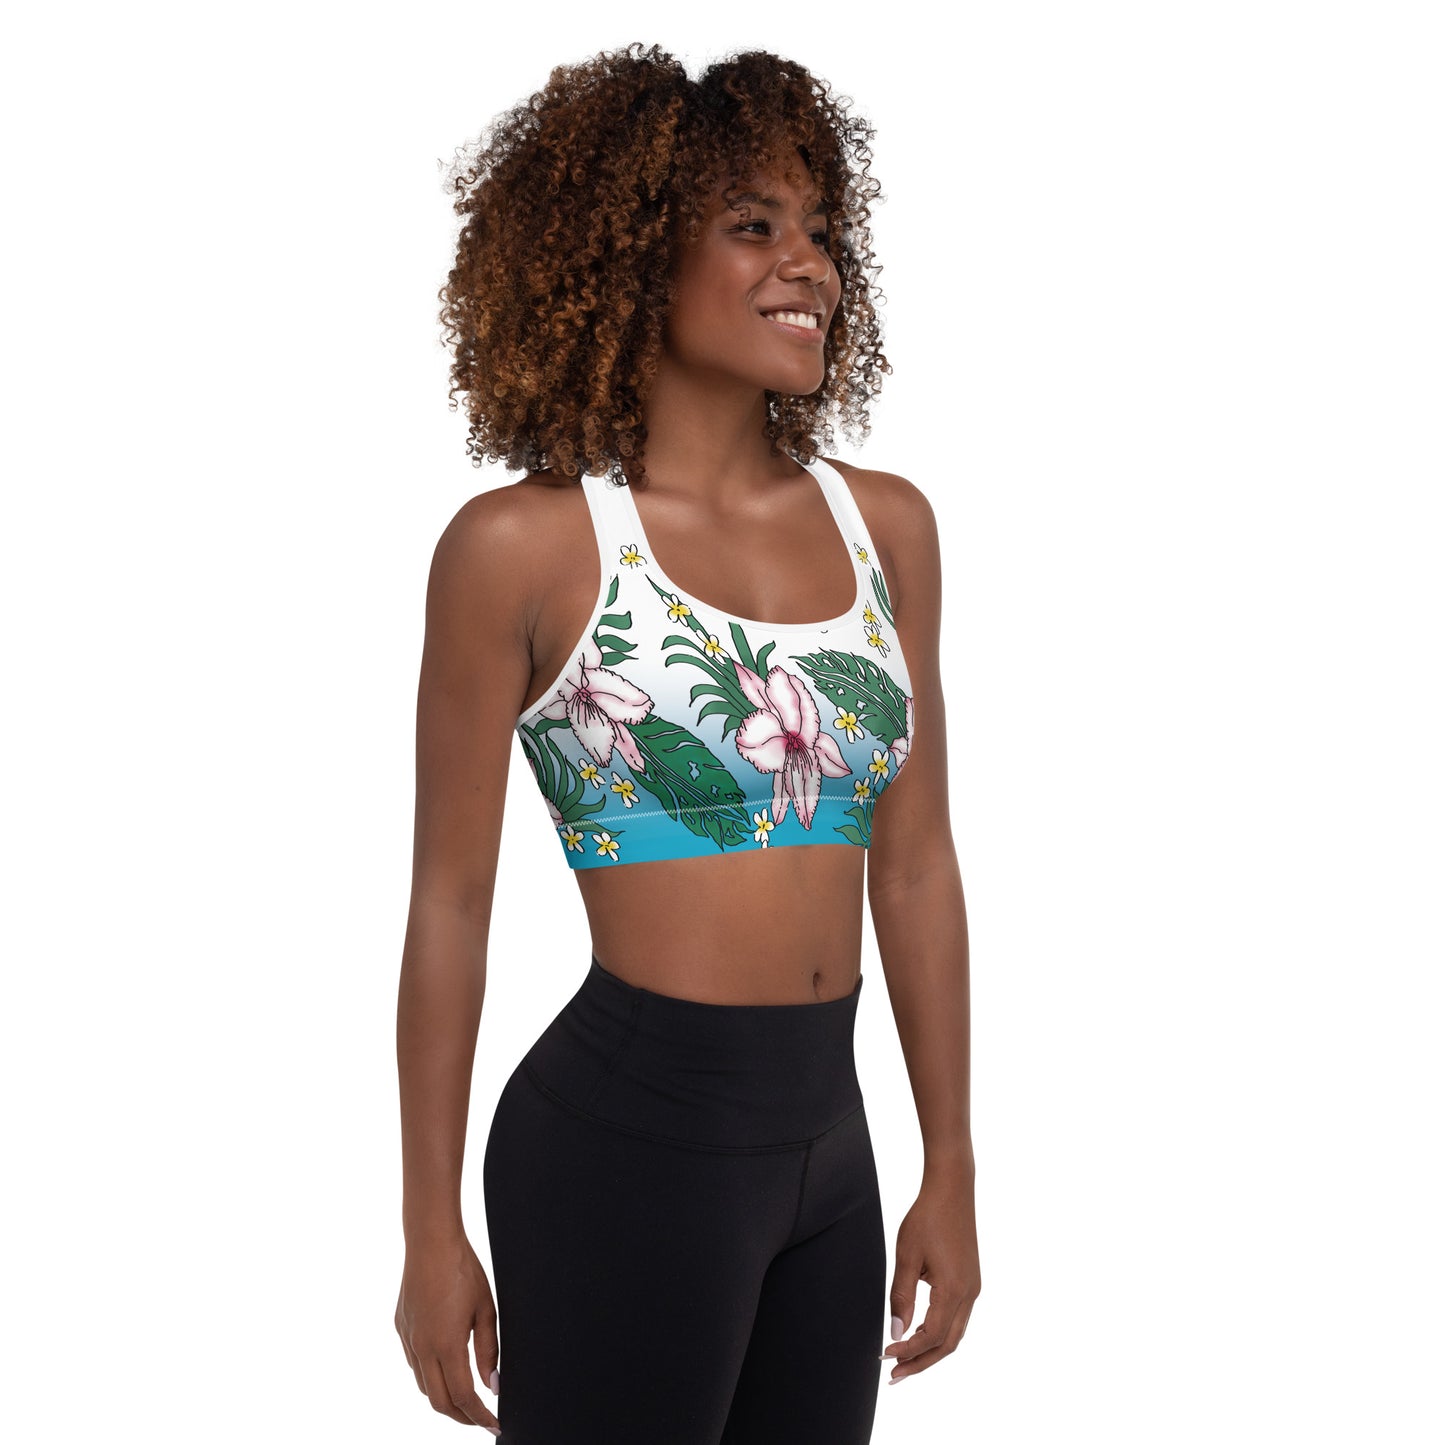 "Tropical Delight" Padded Sports Bra